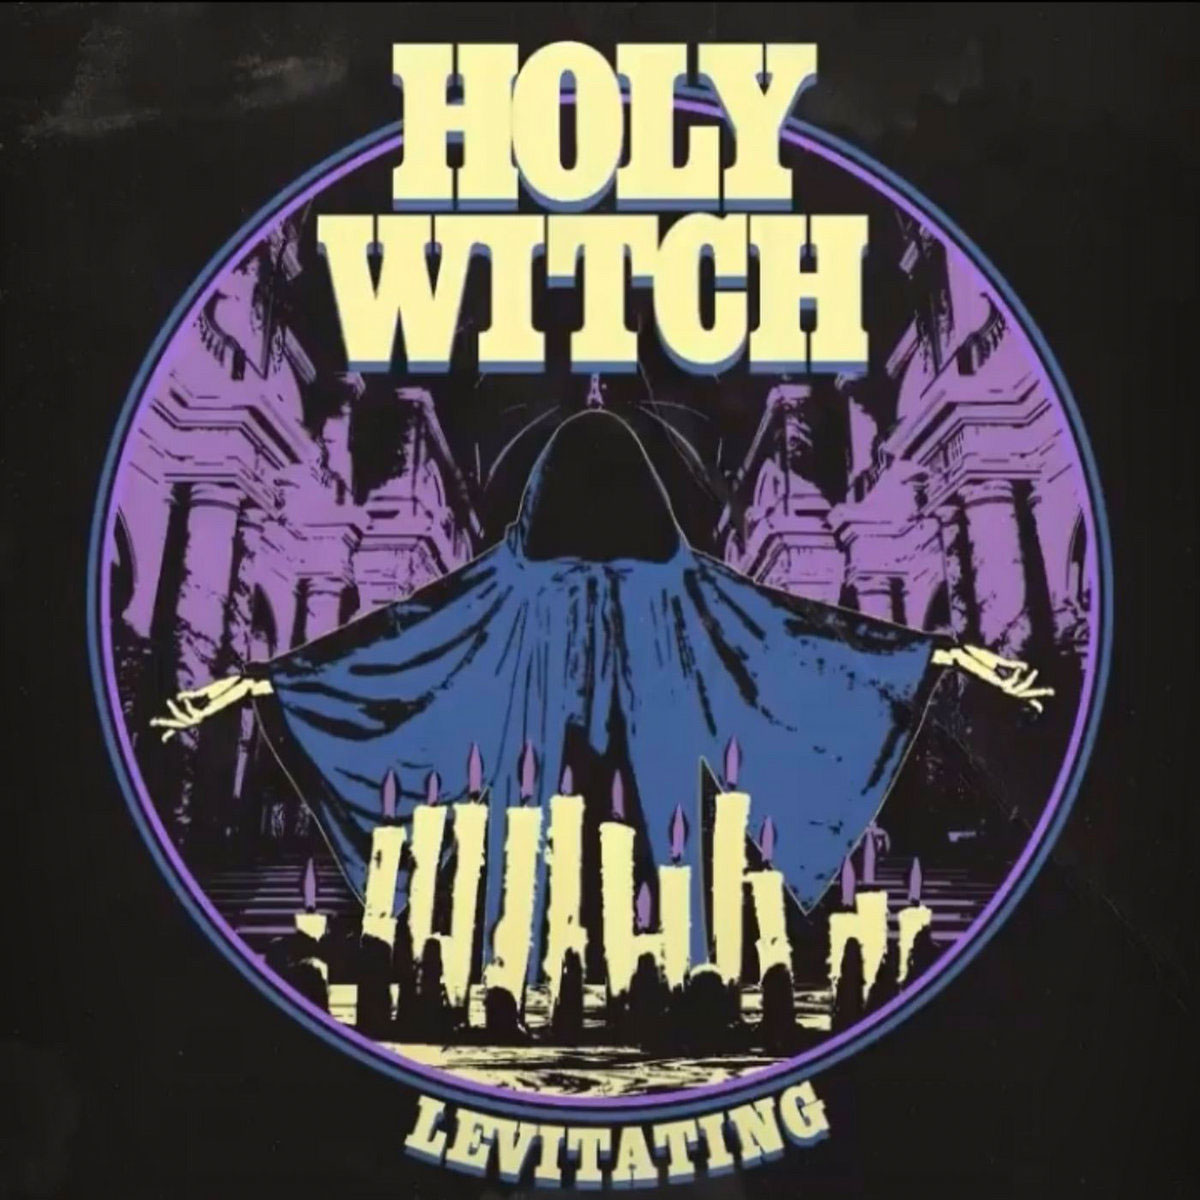 Levitating by Holy Witch